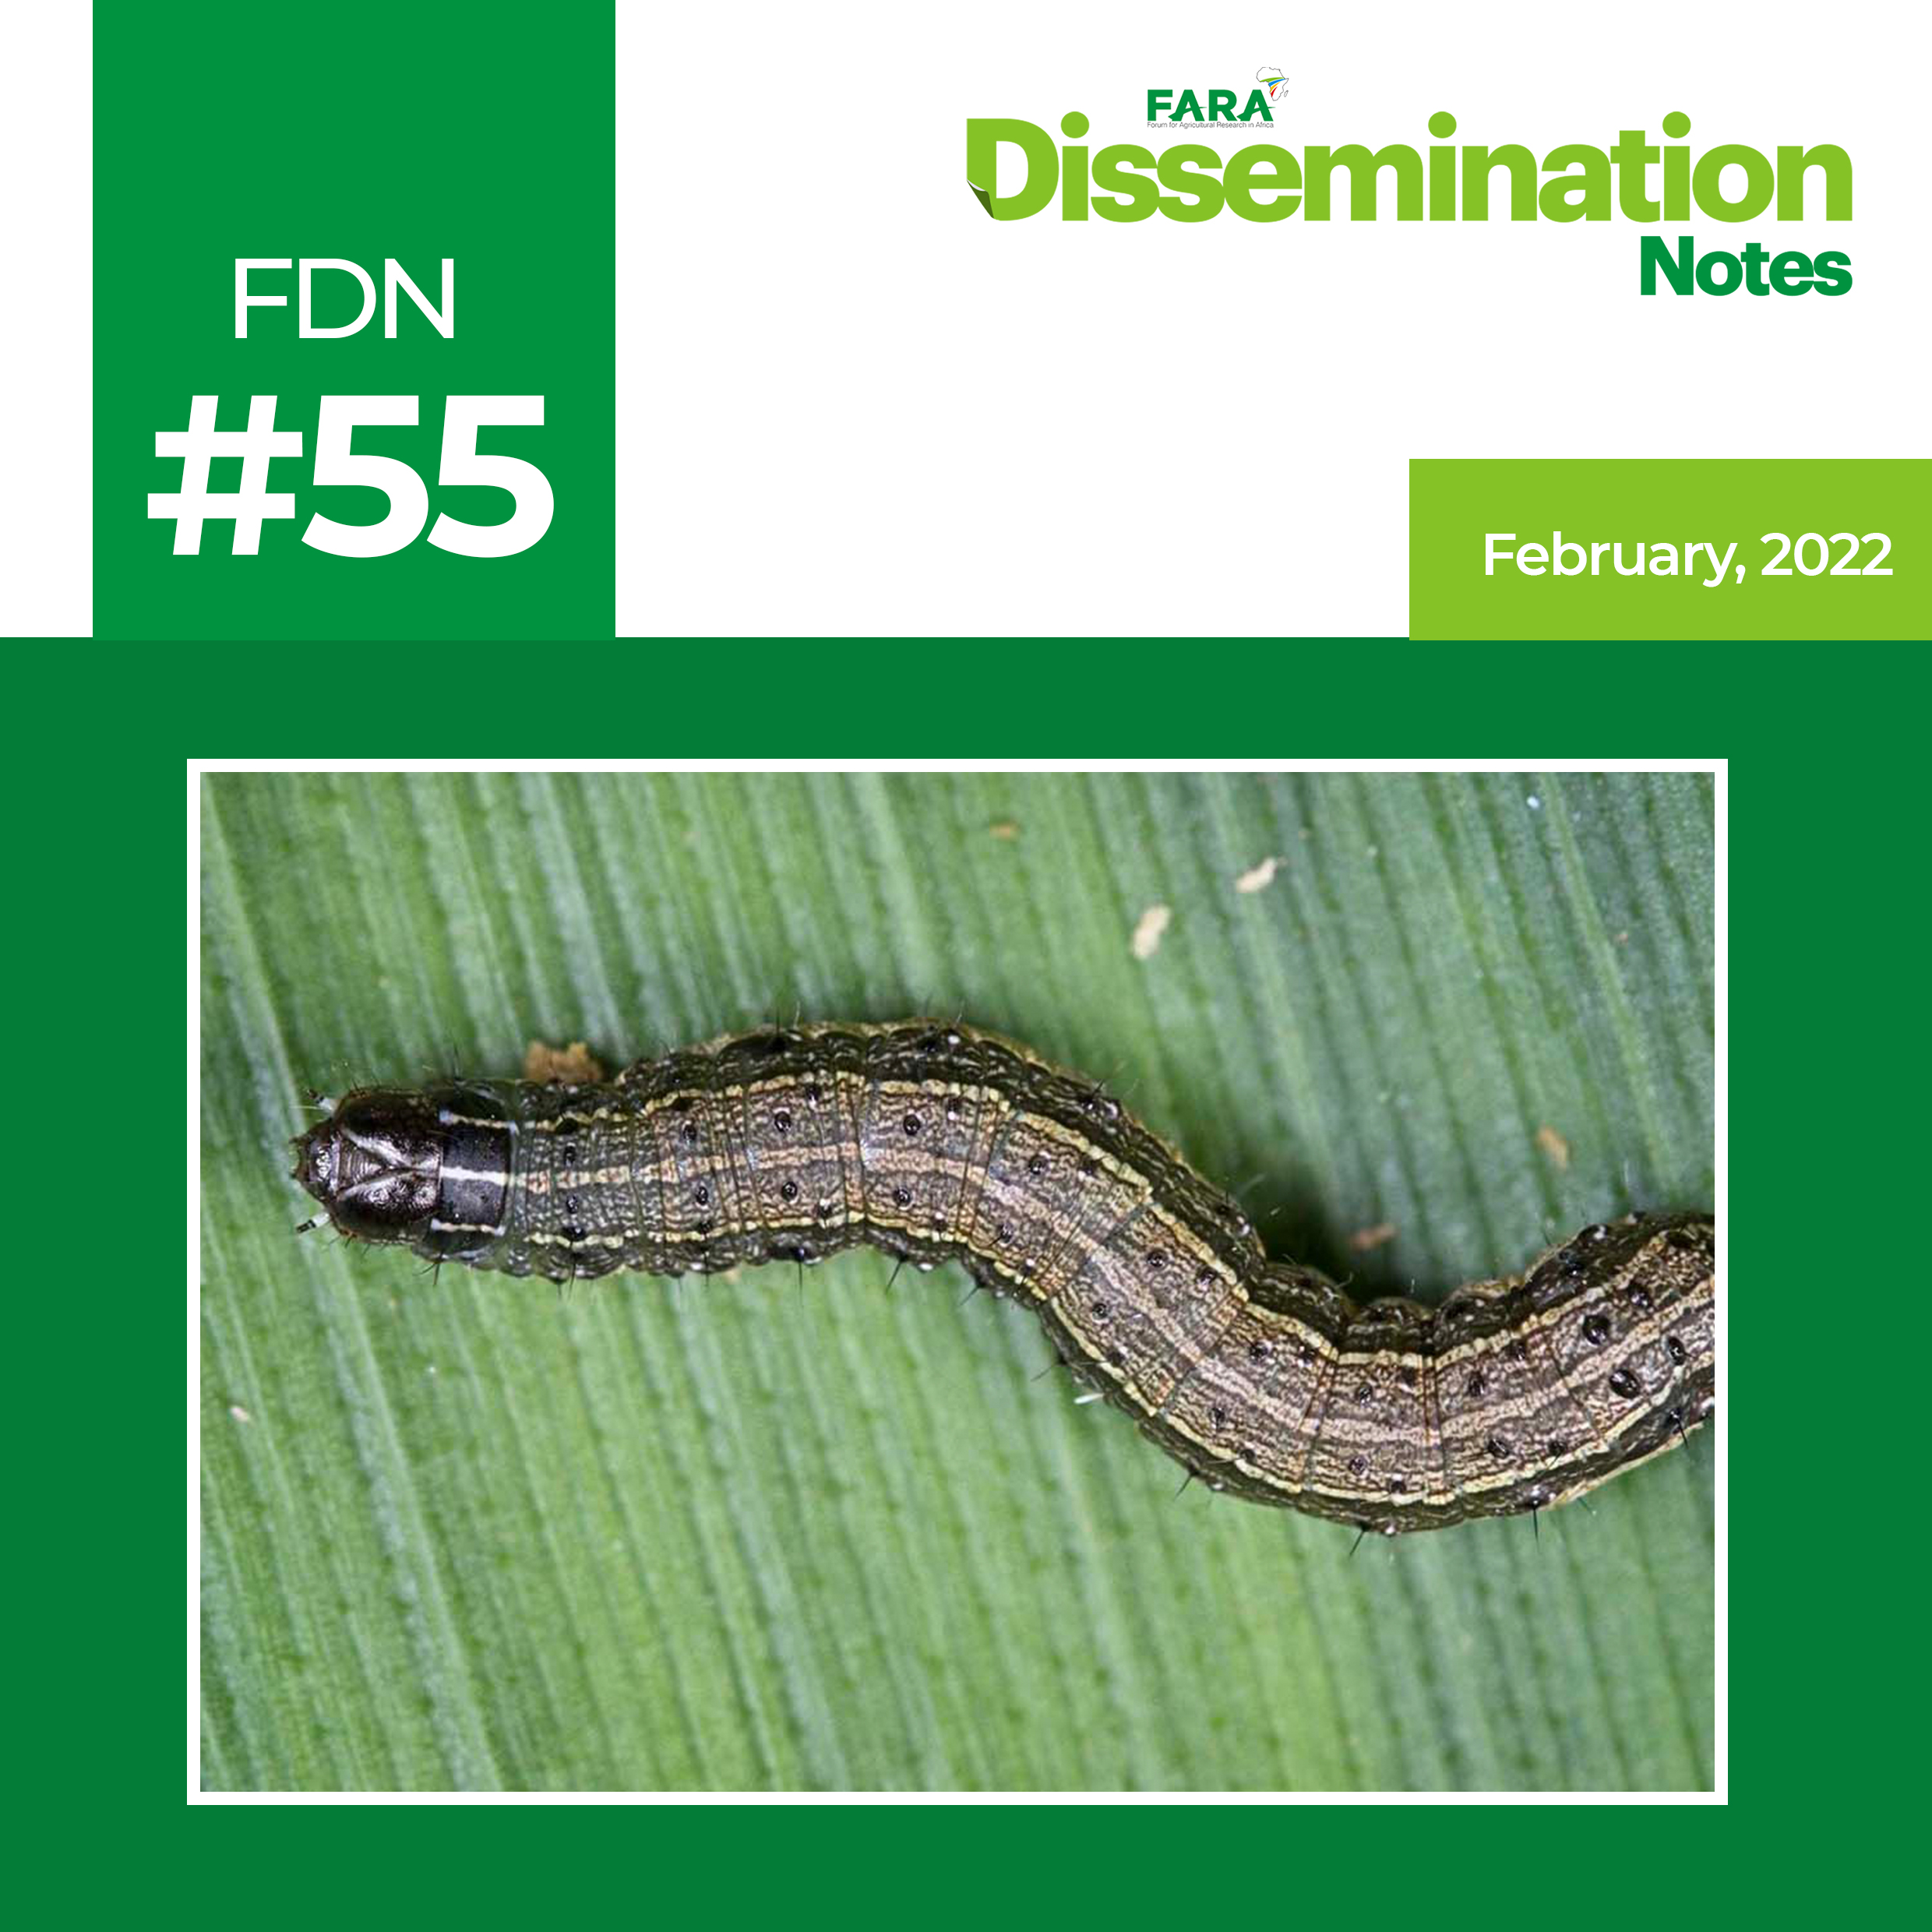 Fall Armyworm Management: General  Principles & Scouting